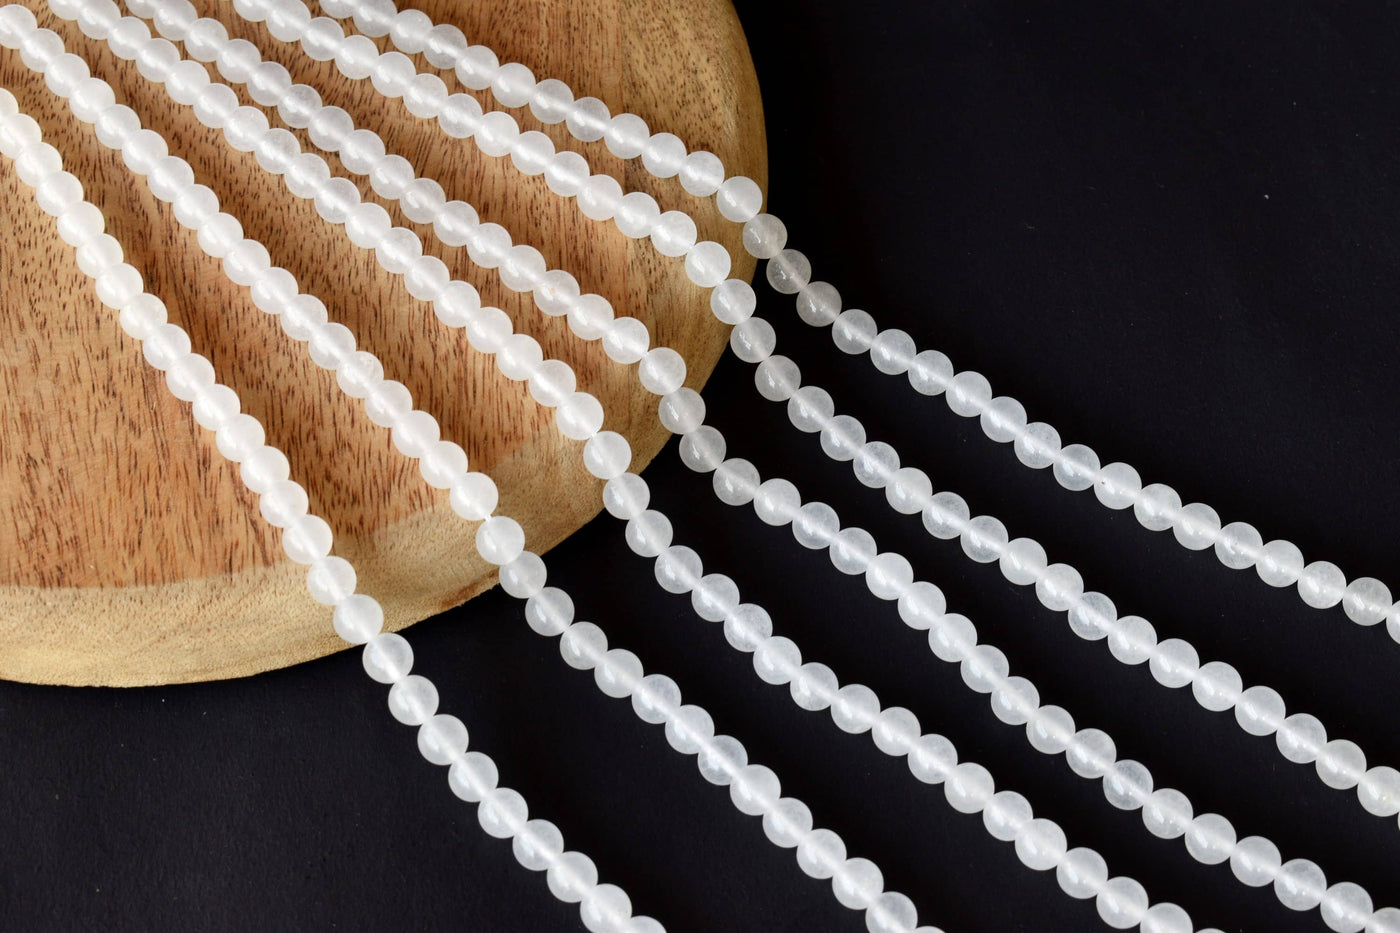 White Agate Beads, Natural Round Crystal Beads 6mm to 10mm